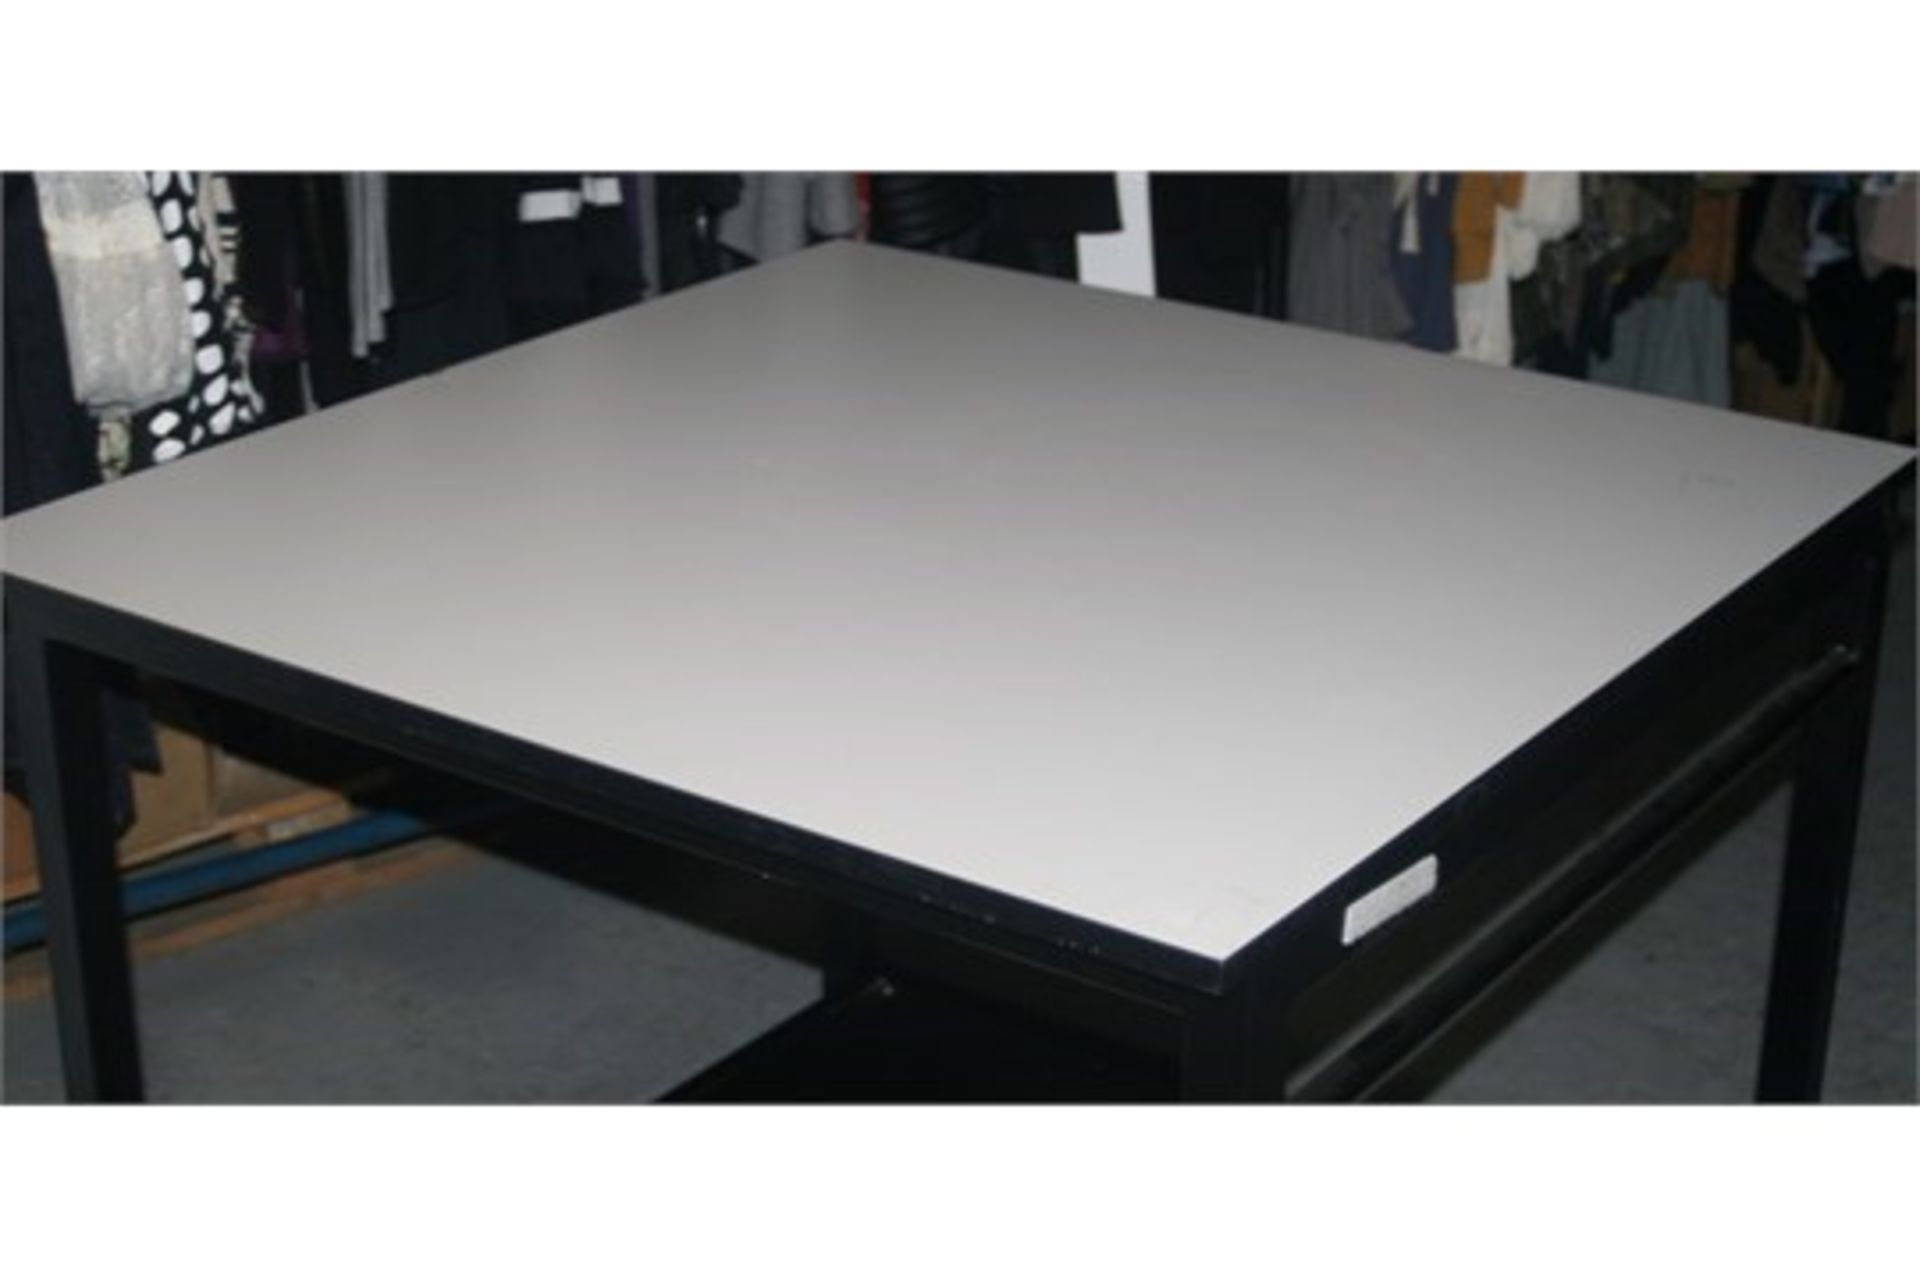 1 x Mobile Work Table - Large Size With Undershelf and Heavy Duty Castor Wheels - Strong Build - Image 4 of 4